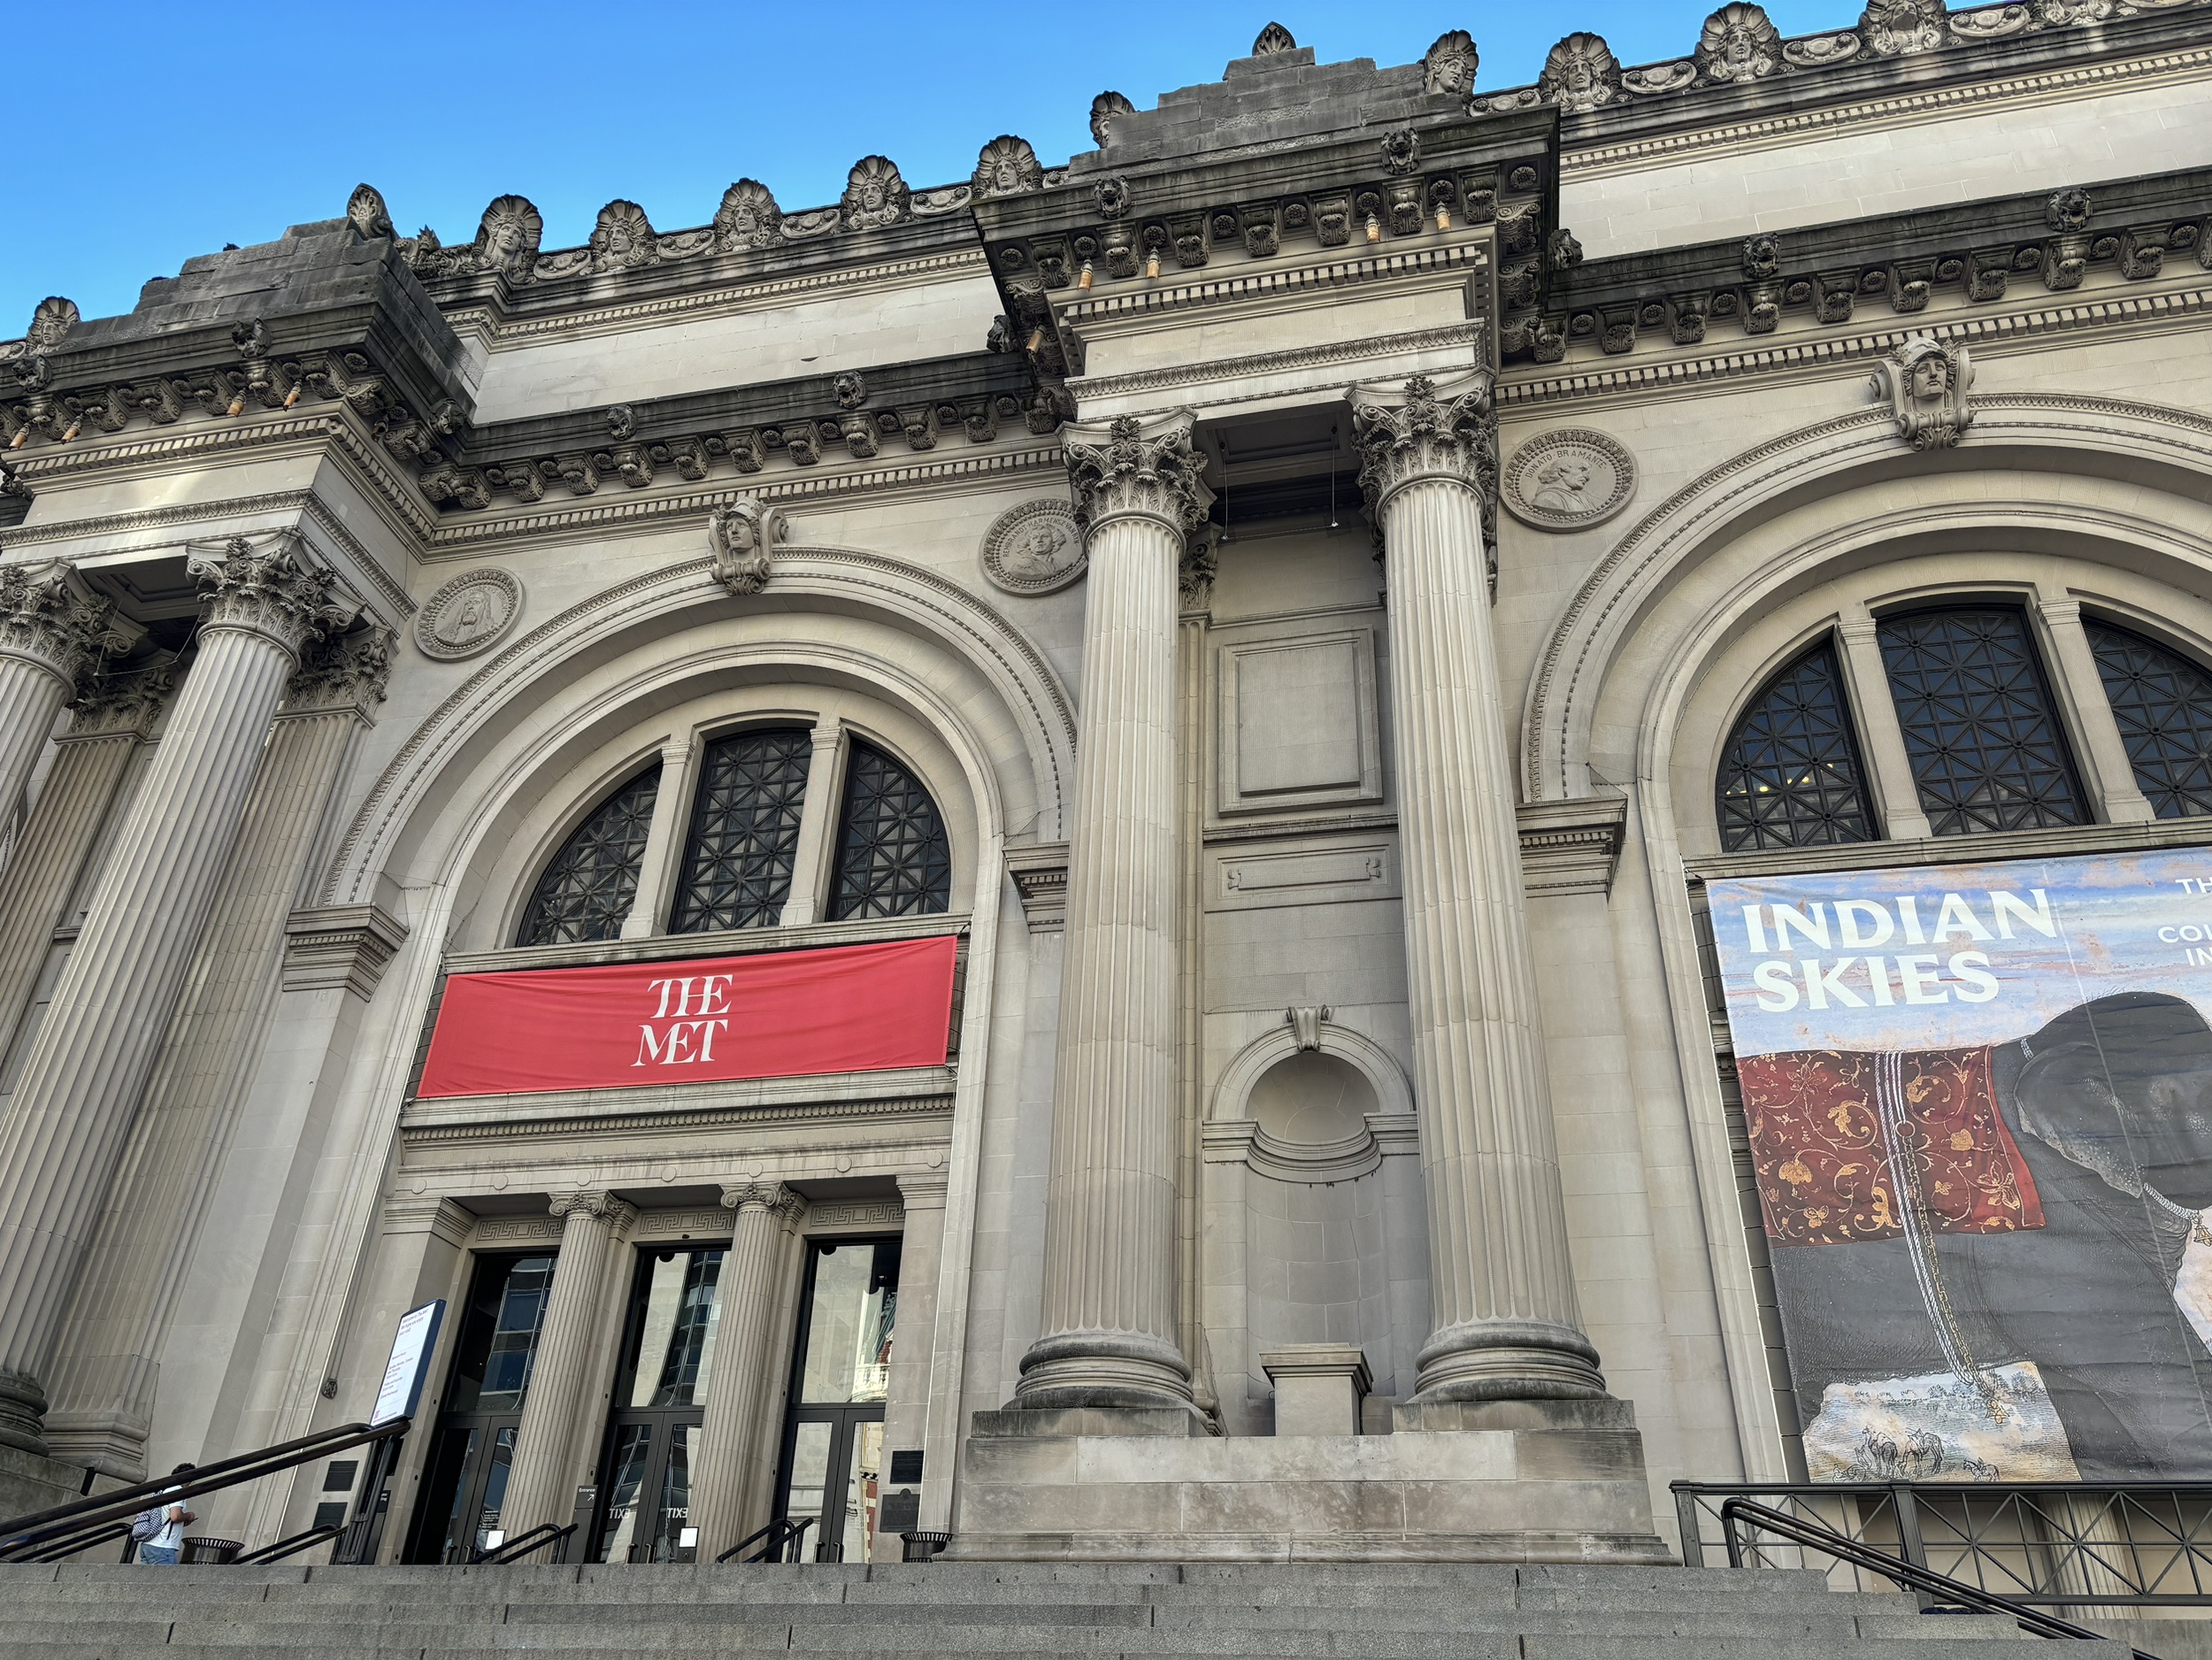 The front entrance of the Metropolitan Museum of Art.